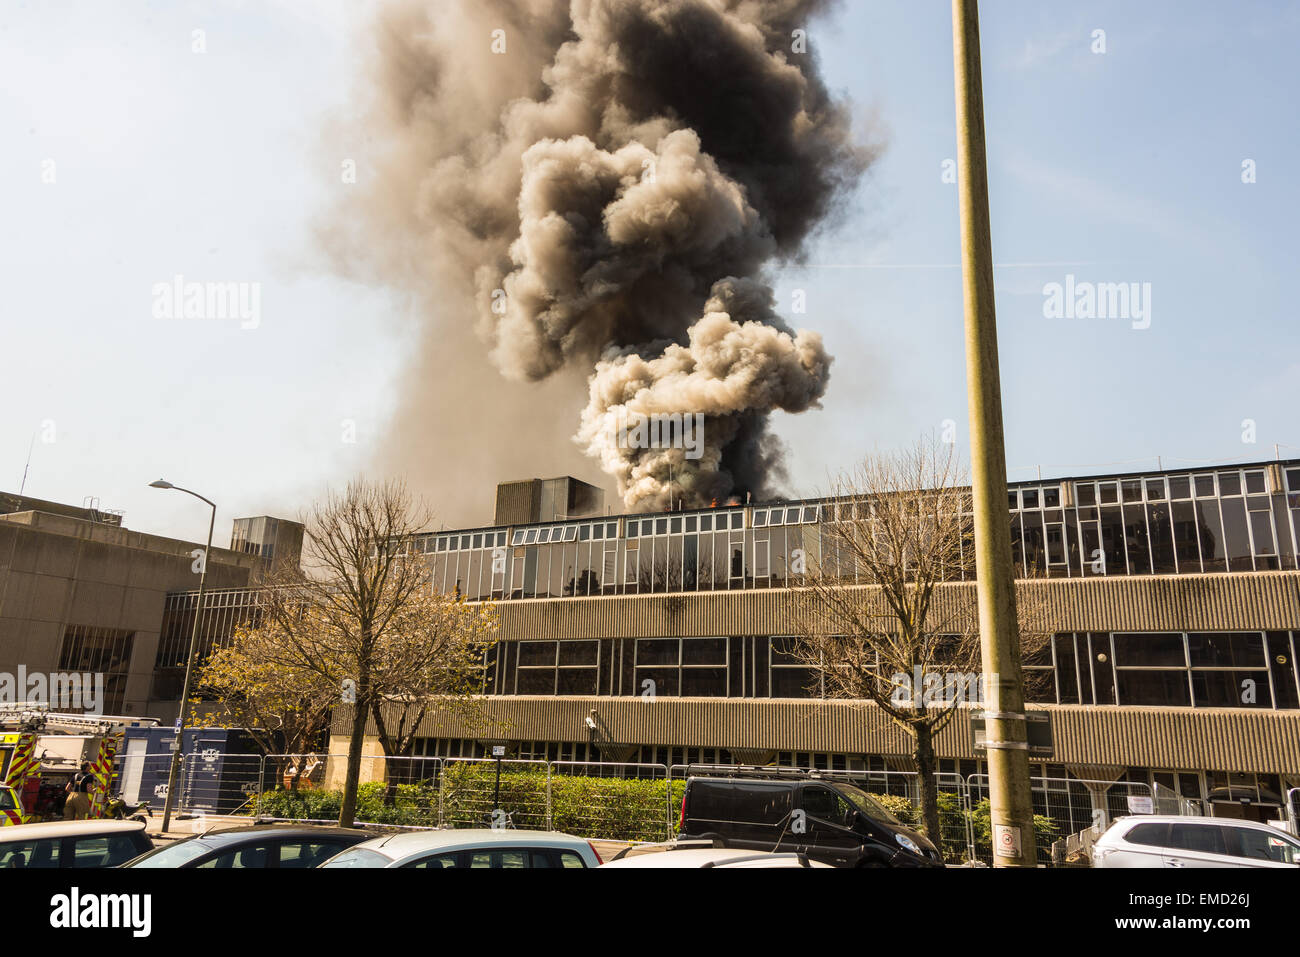 Brighton, UK. 20th Apr, 2015. Heavy smoke and flames as firefighters tackle a blaze at Hove Town Hall which broke out around lunchtime today. The Town Hall houses council offices and the police station. Credit:  Julia Claxton/Alamy Live News Stock Photo